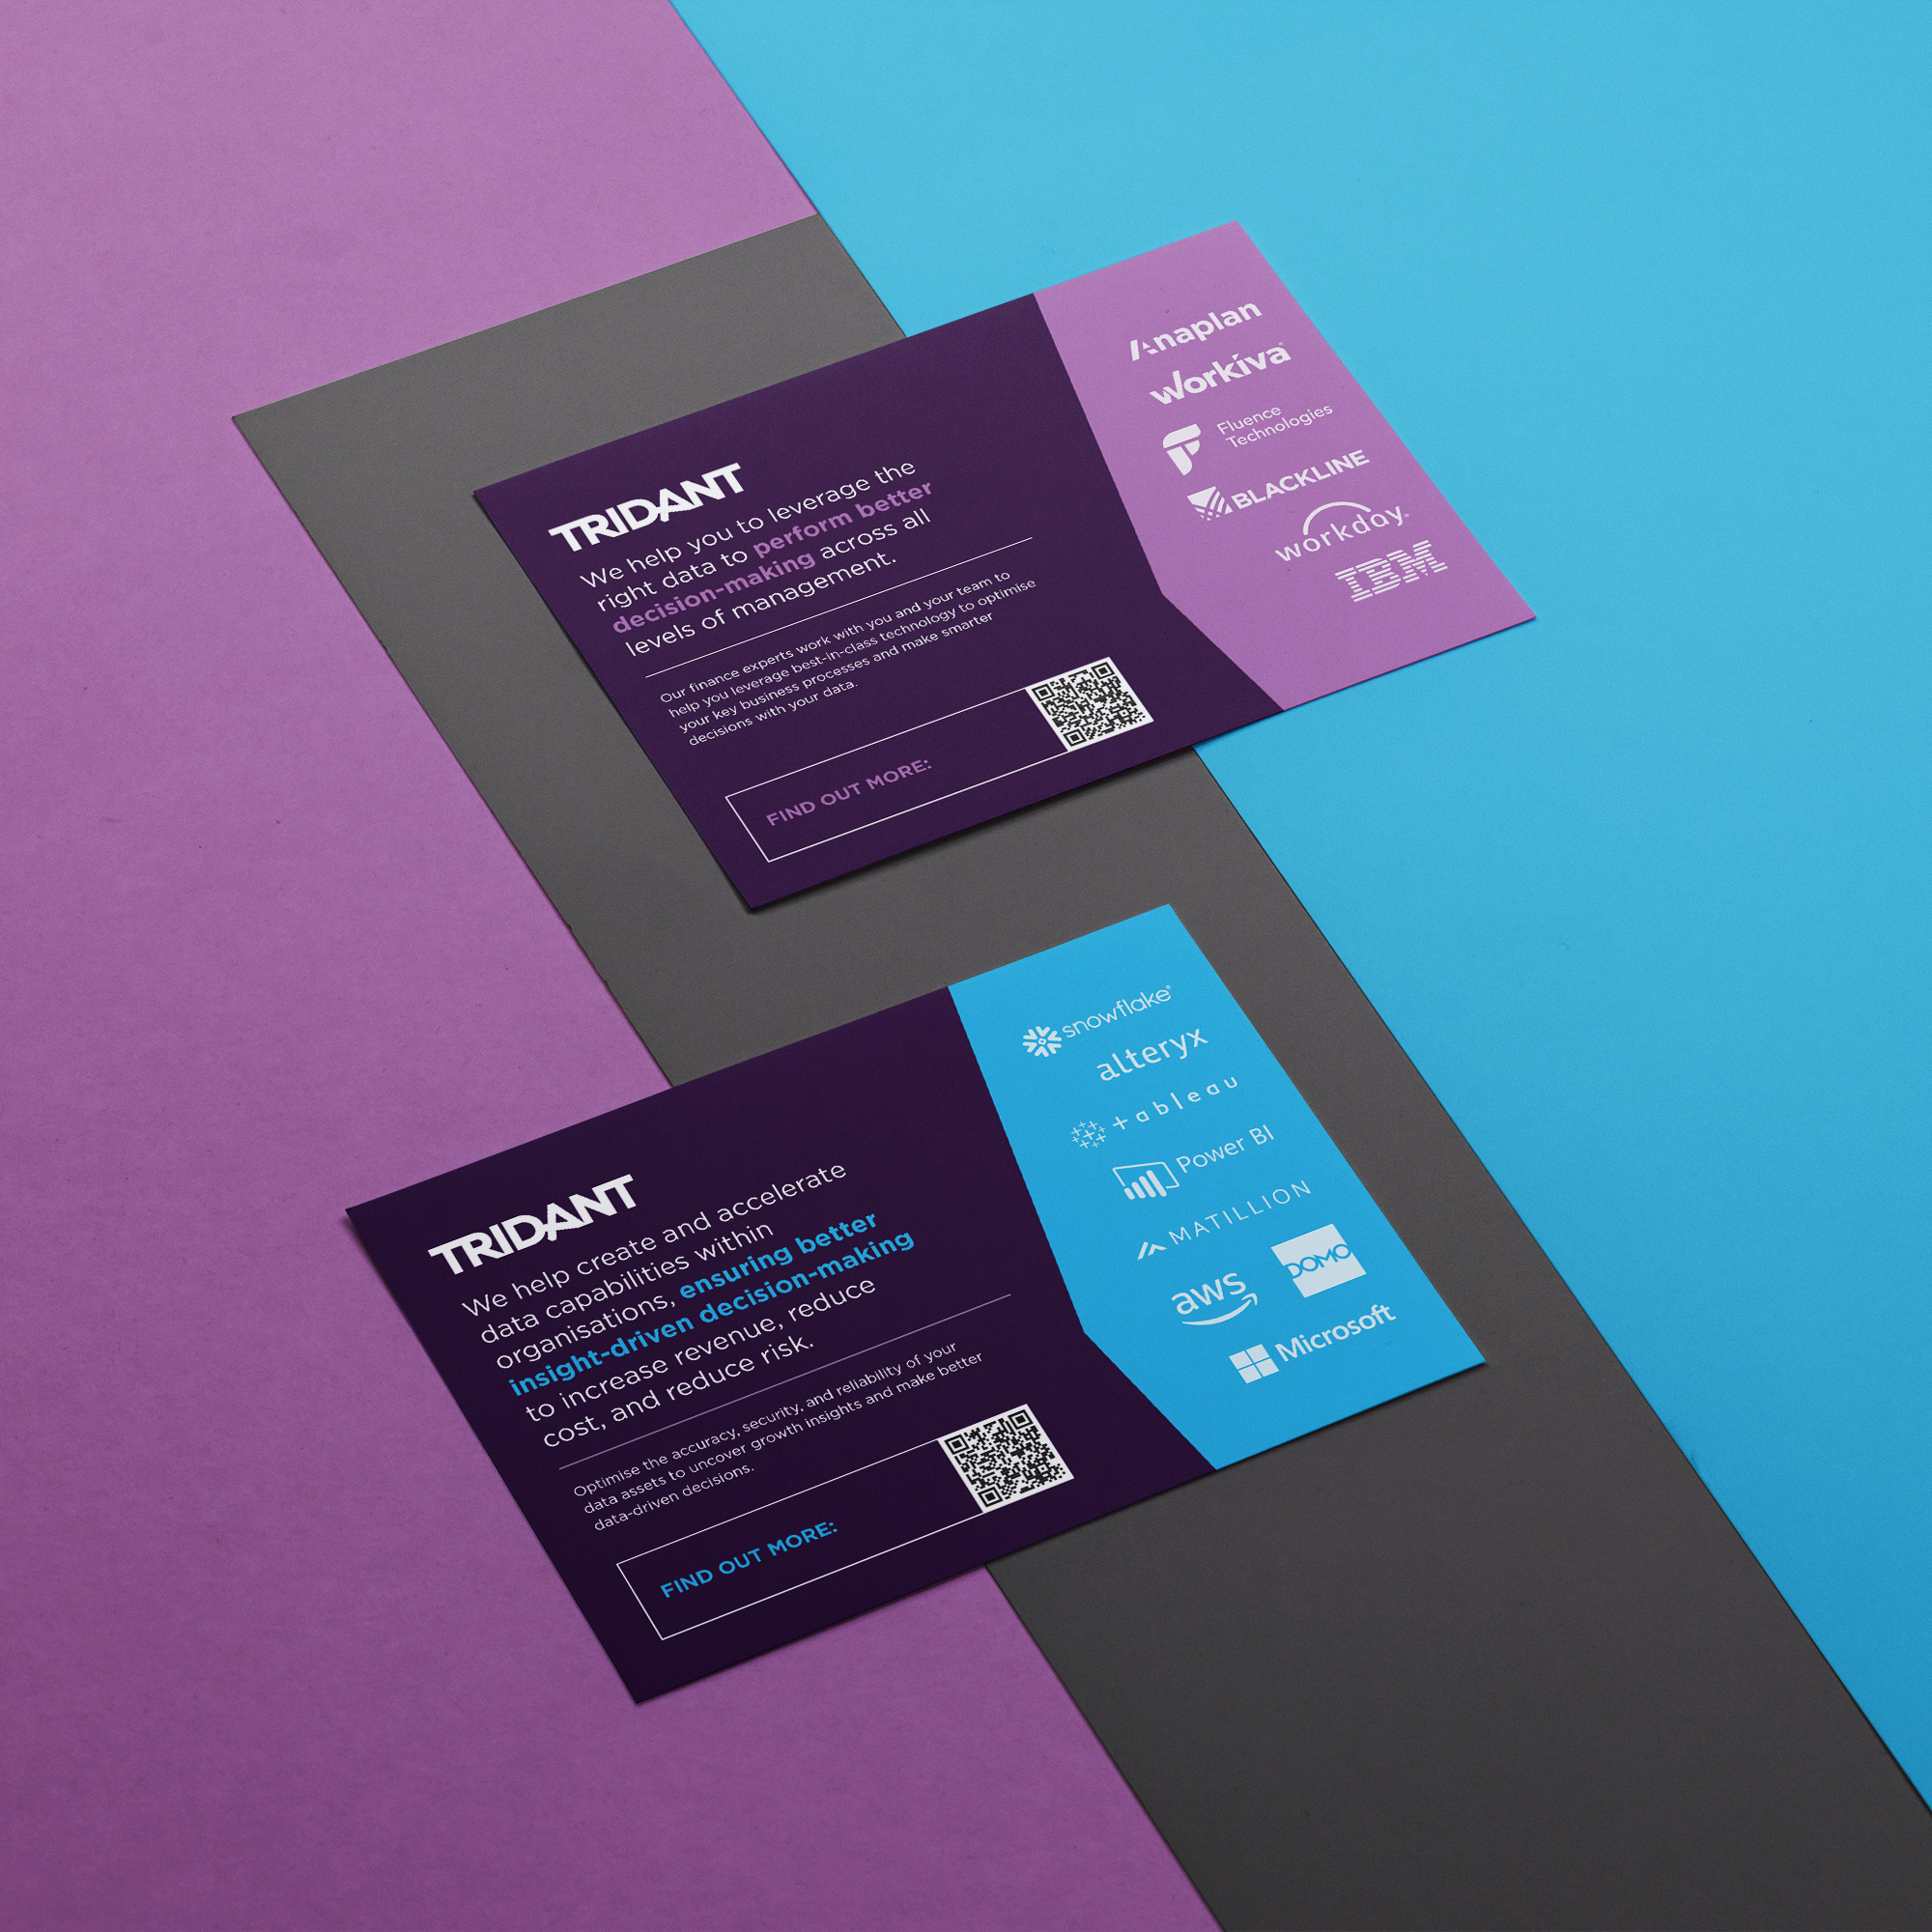 Two Tridant flyers displayed on a purple, grey and blue background, highlighting their data solutions and partnerships with companies such as Amazon, Workiva, and Microsoft.